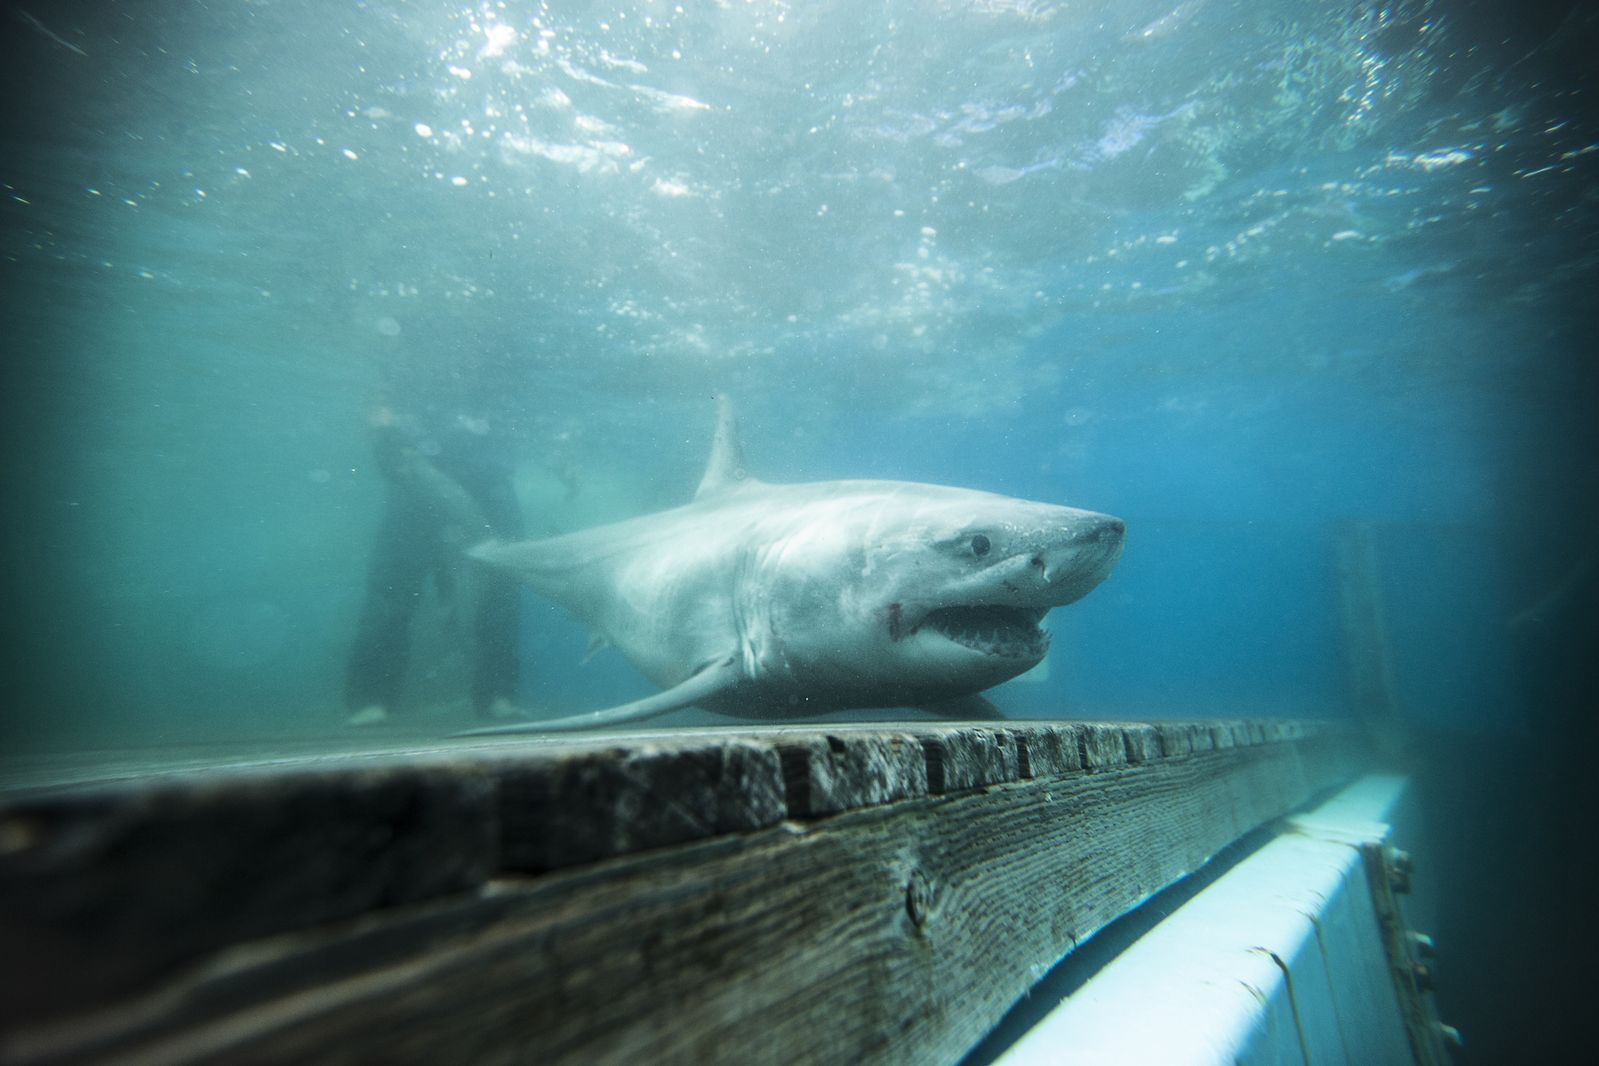 How Two Great White Shark 'Buddies' Could Change Perceptions of